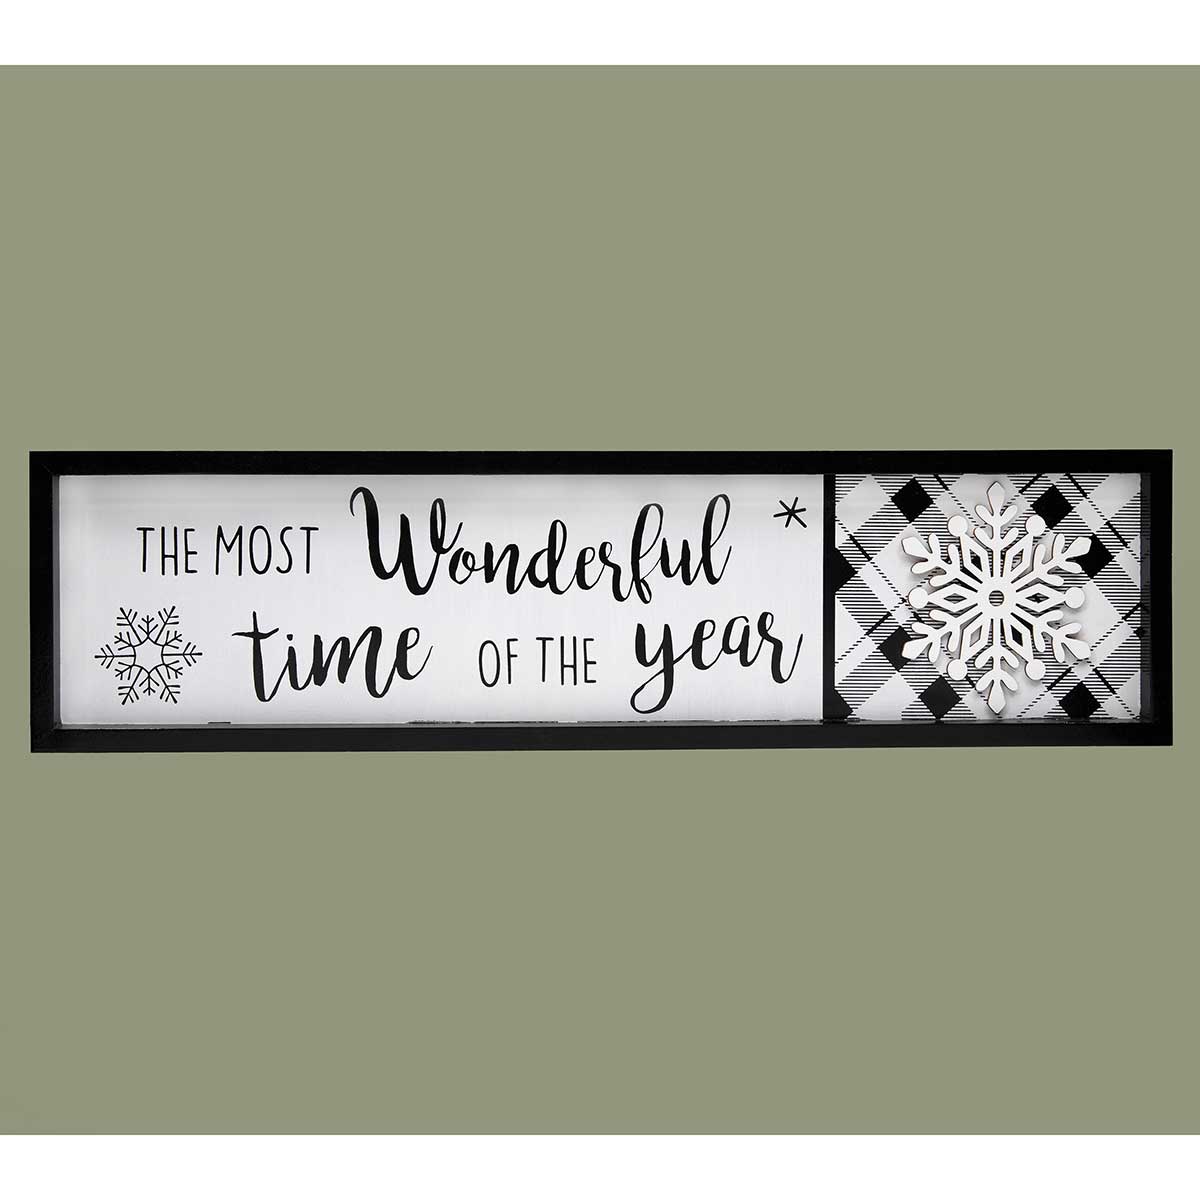 SIGN DANISH MOST WONDERFUL 23.75IN X 6IN WOOD - Click Image to Close